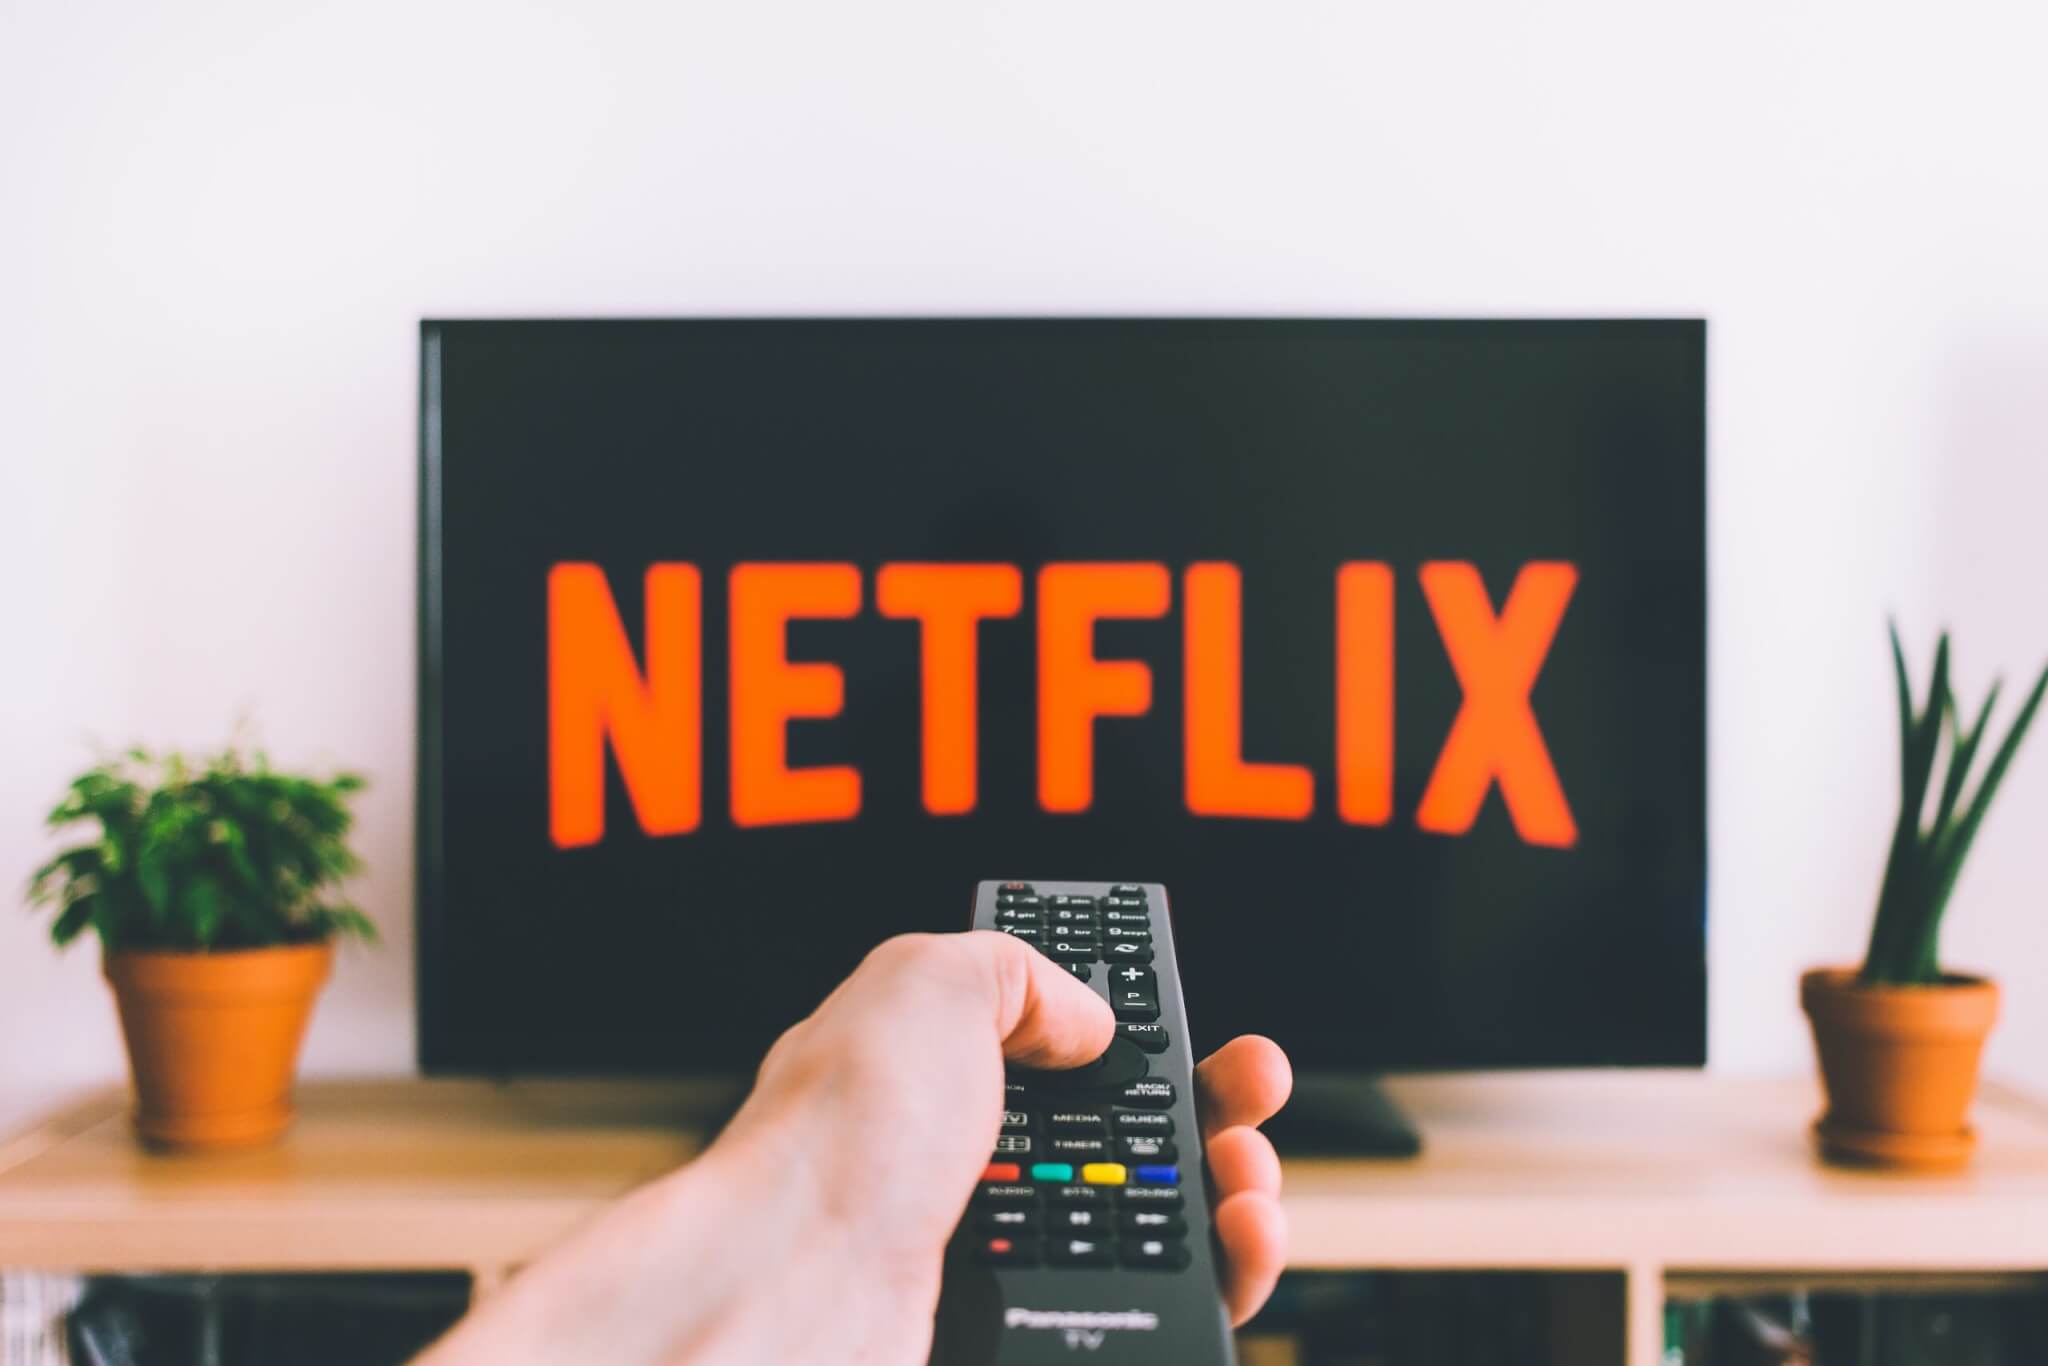 Netflix account hacks, Free Person Holding a Remote Control Stock Photo